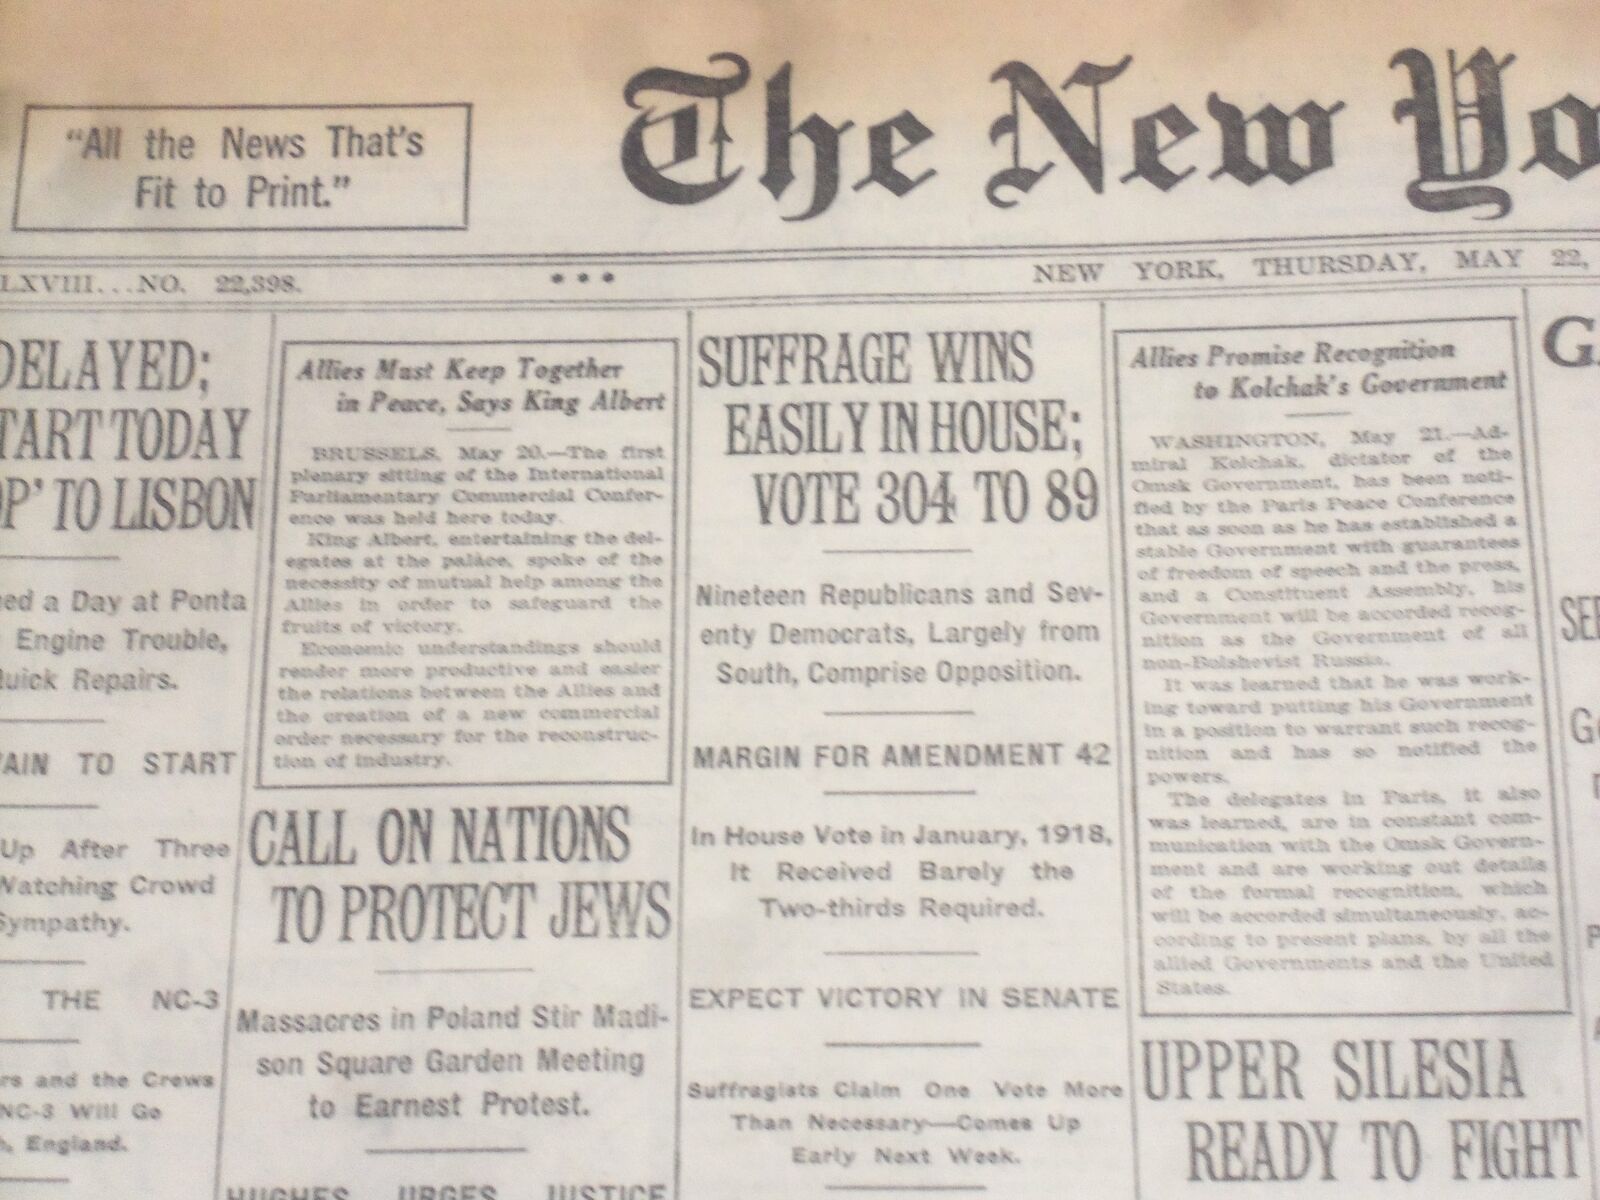 1919 MAY 22 NEW YORK TIMES - SUFFRAGE WINS EASILY IN HOUSE - NT 9261